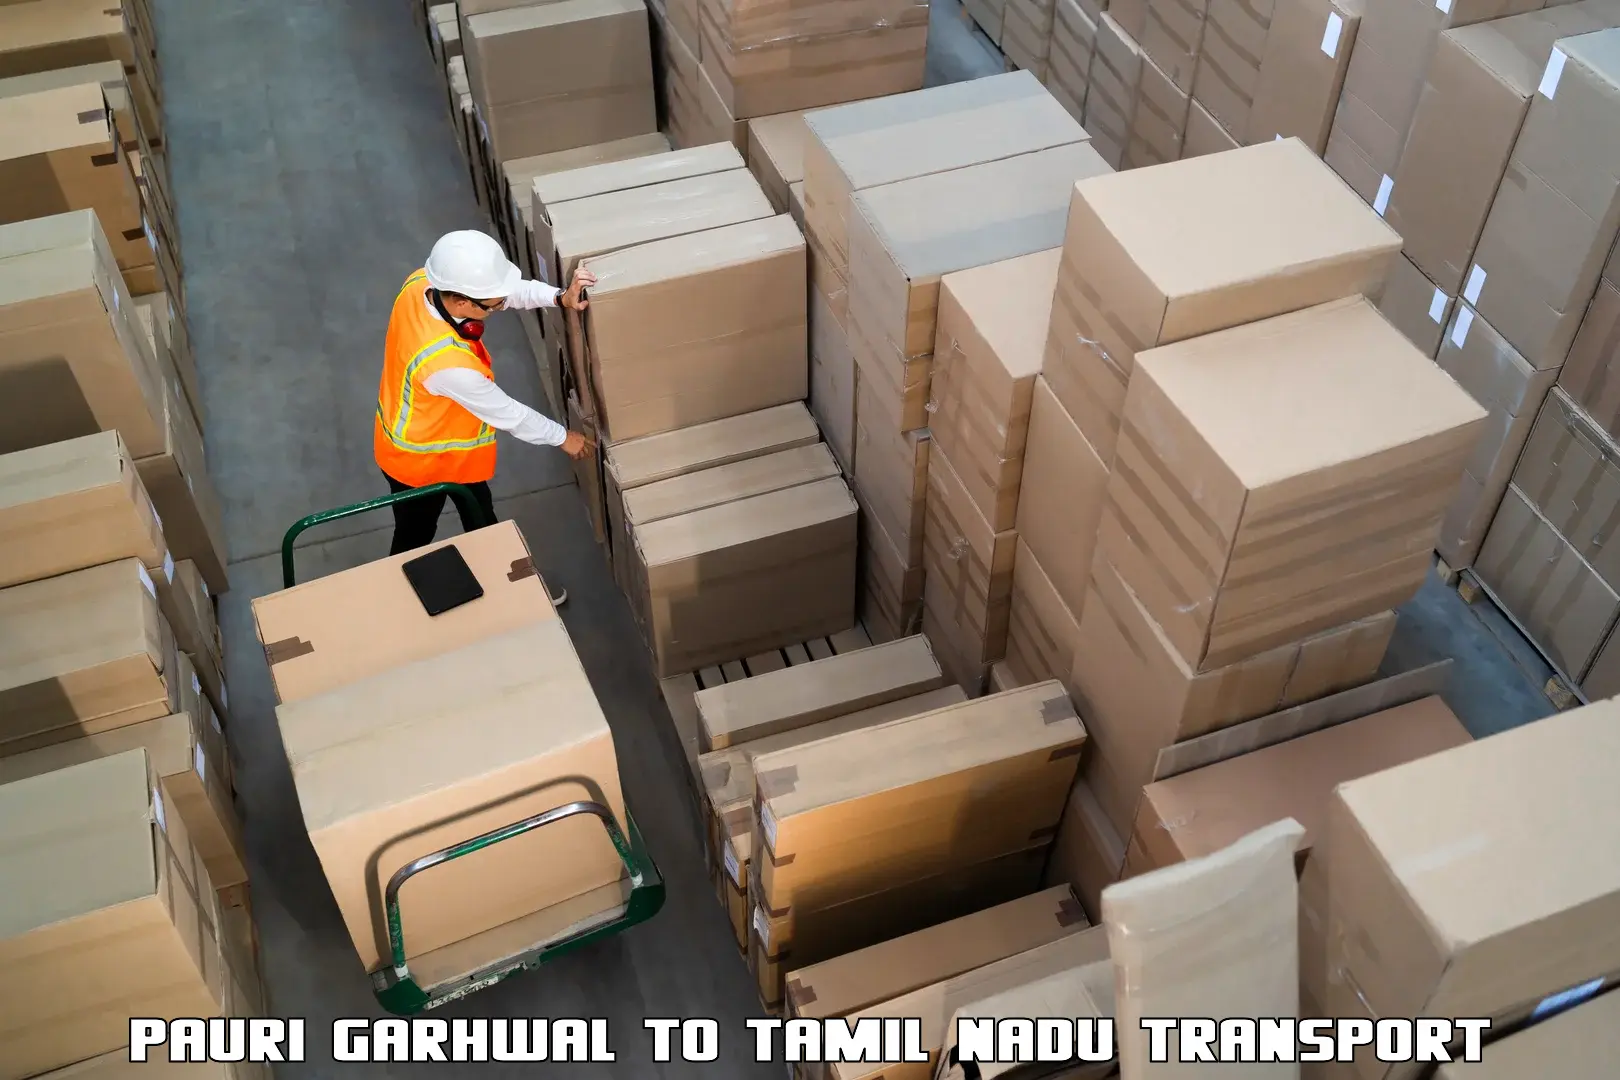 Furniture transport service in Pauri Garhwal to Sri Ramachandra Institute of Higher Education and Research Chennai